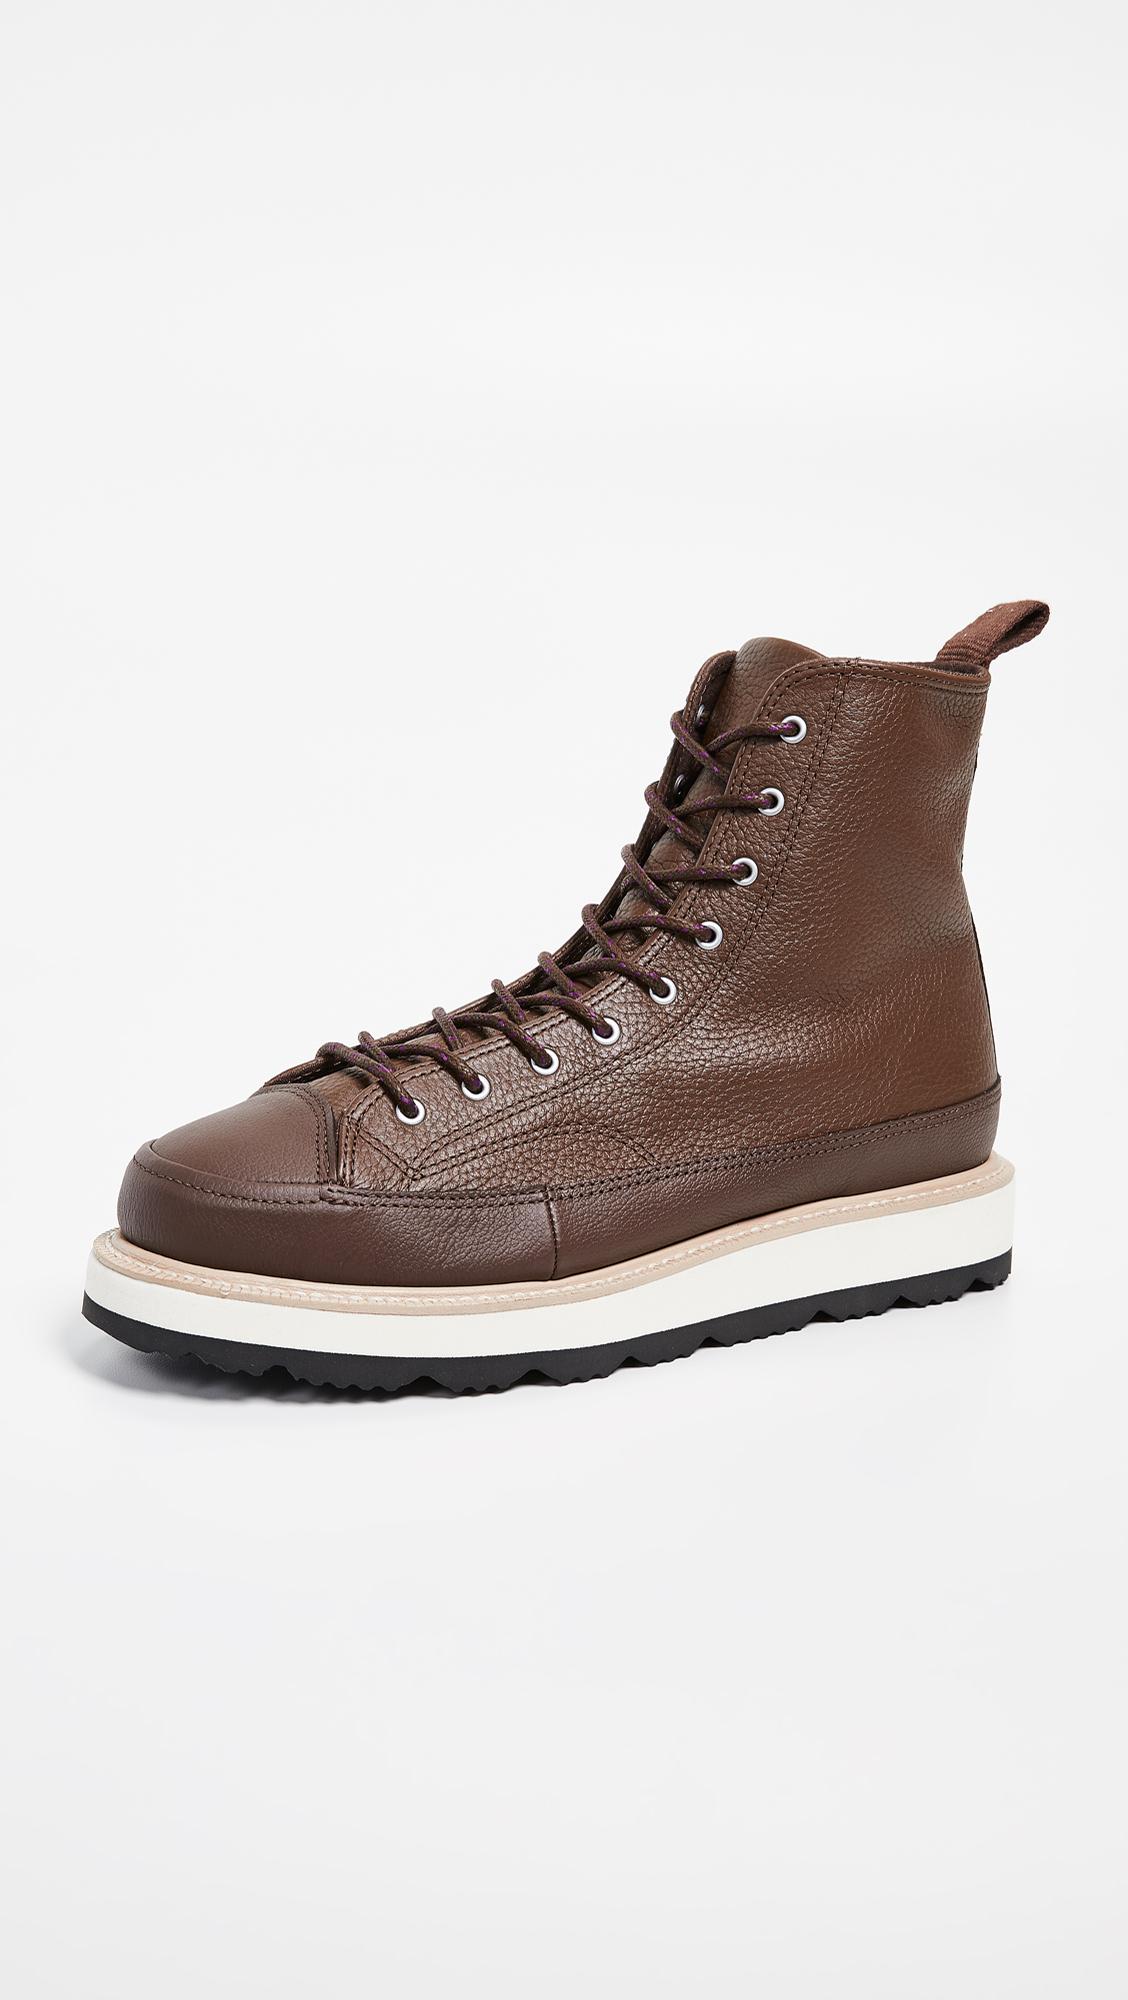 Lyst - Converse Chuck Taylor Crafted Boots in Brown for Men